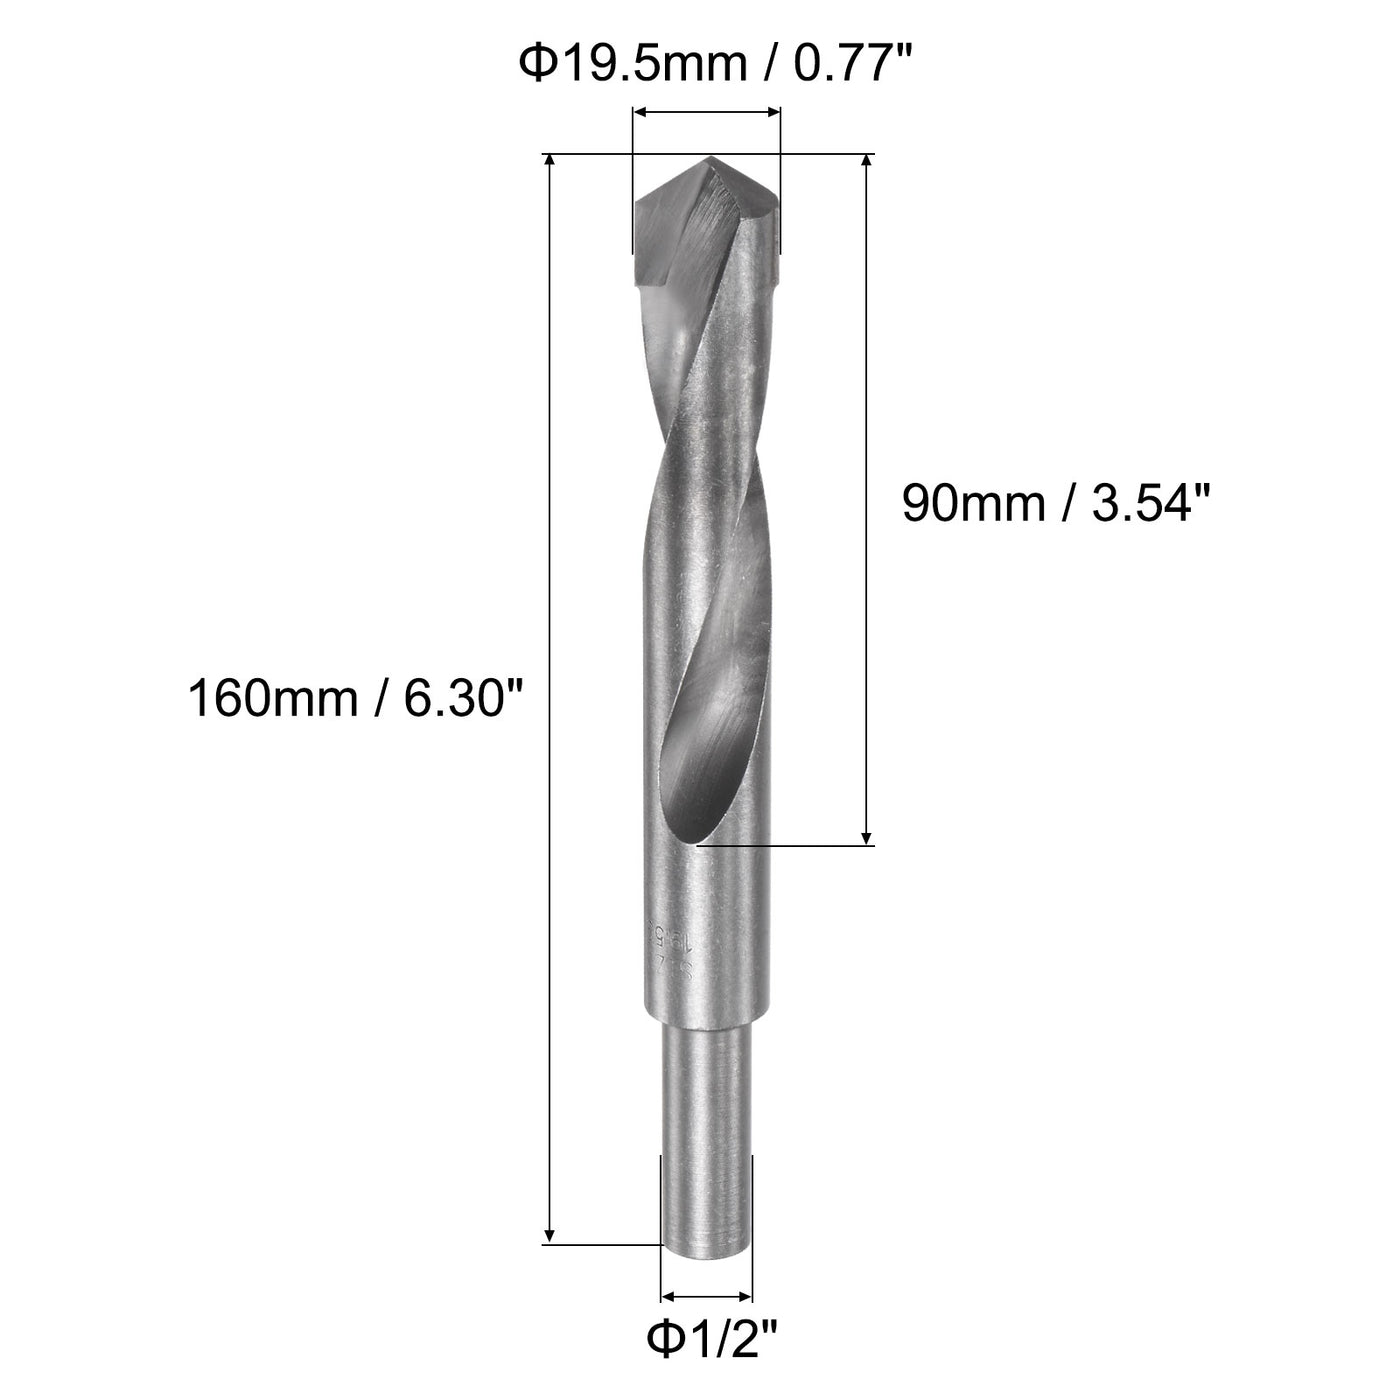 uxcell Uxcell Reduced Shank Cemented Carbide Twist Drill Bits, Straight Shank